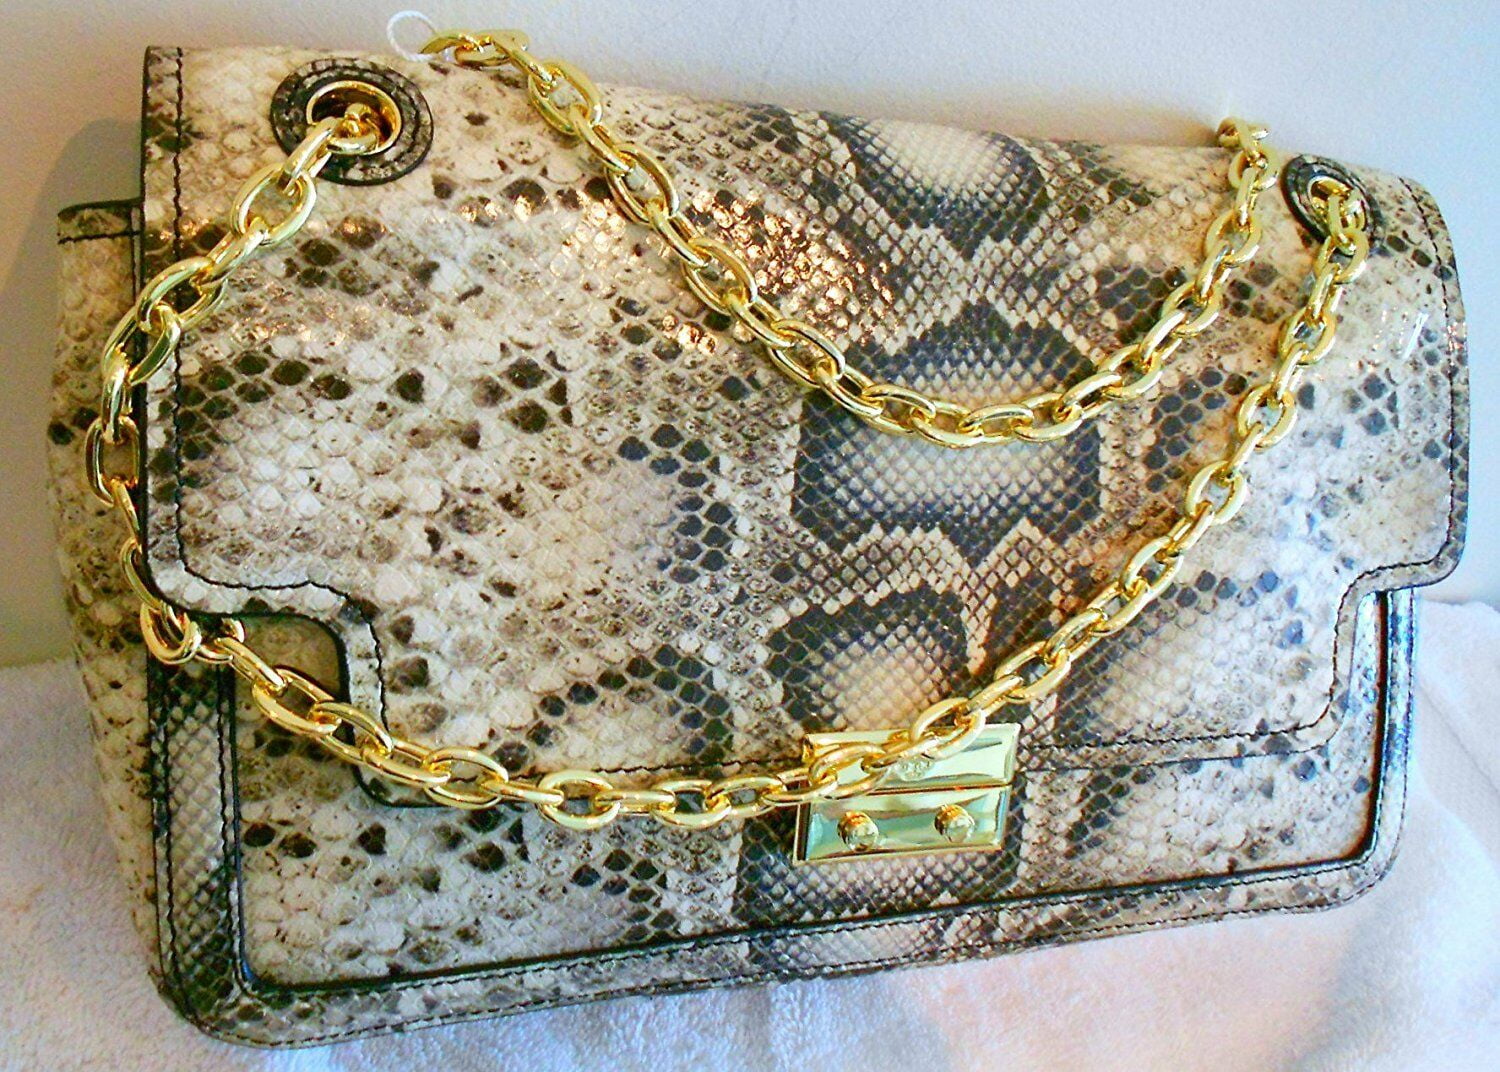 TORY BURCH LEE RADZIWILL SNAKE EMBOSSED IN ASPEN DOUBLE BAG WITH TWO STRAPS  | eBay